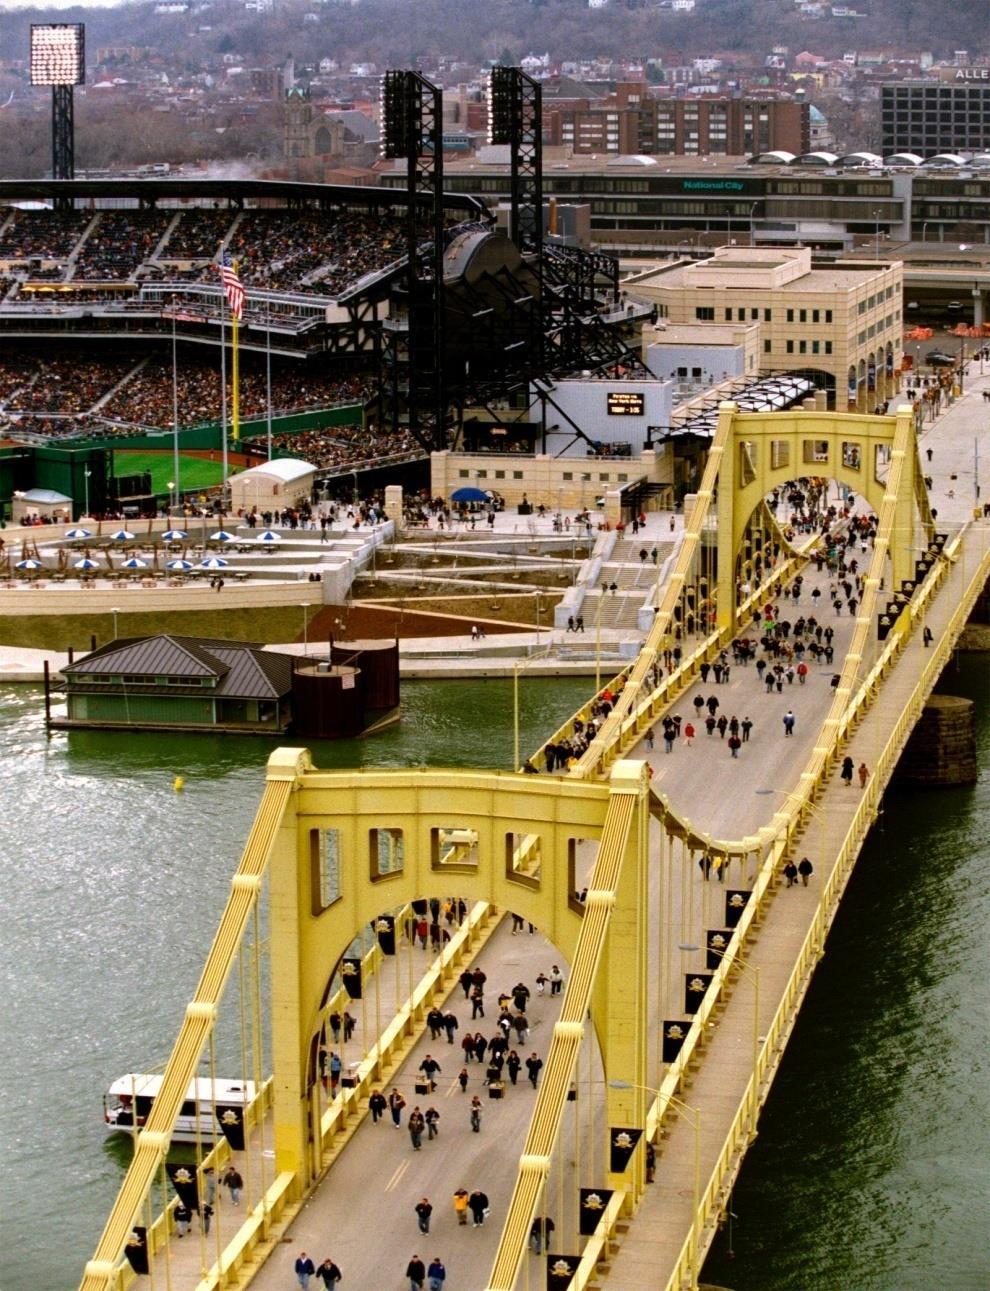 Welcome to Pittsburgh Sports! Pittsburgh Pirates: http://pittsburgh.pirates.mlb.